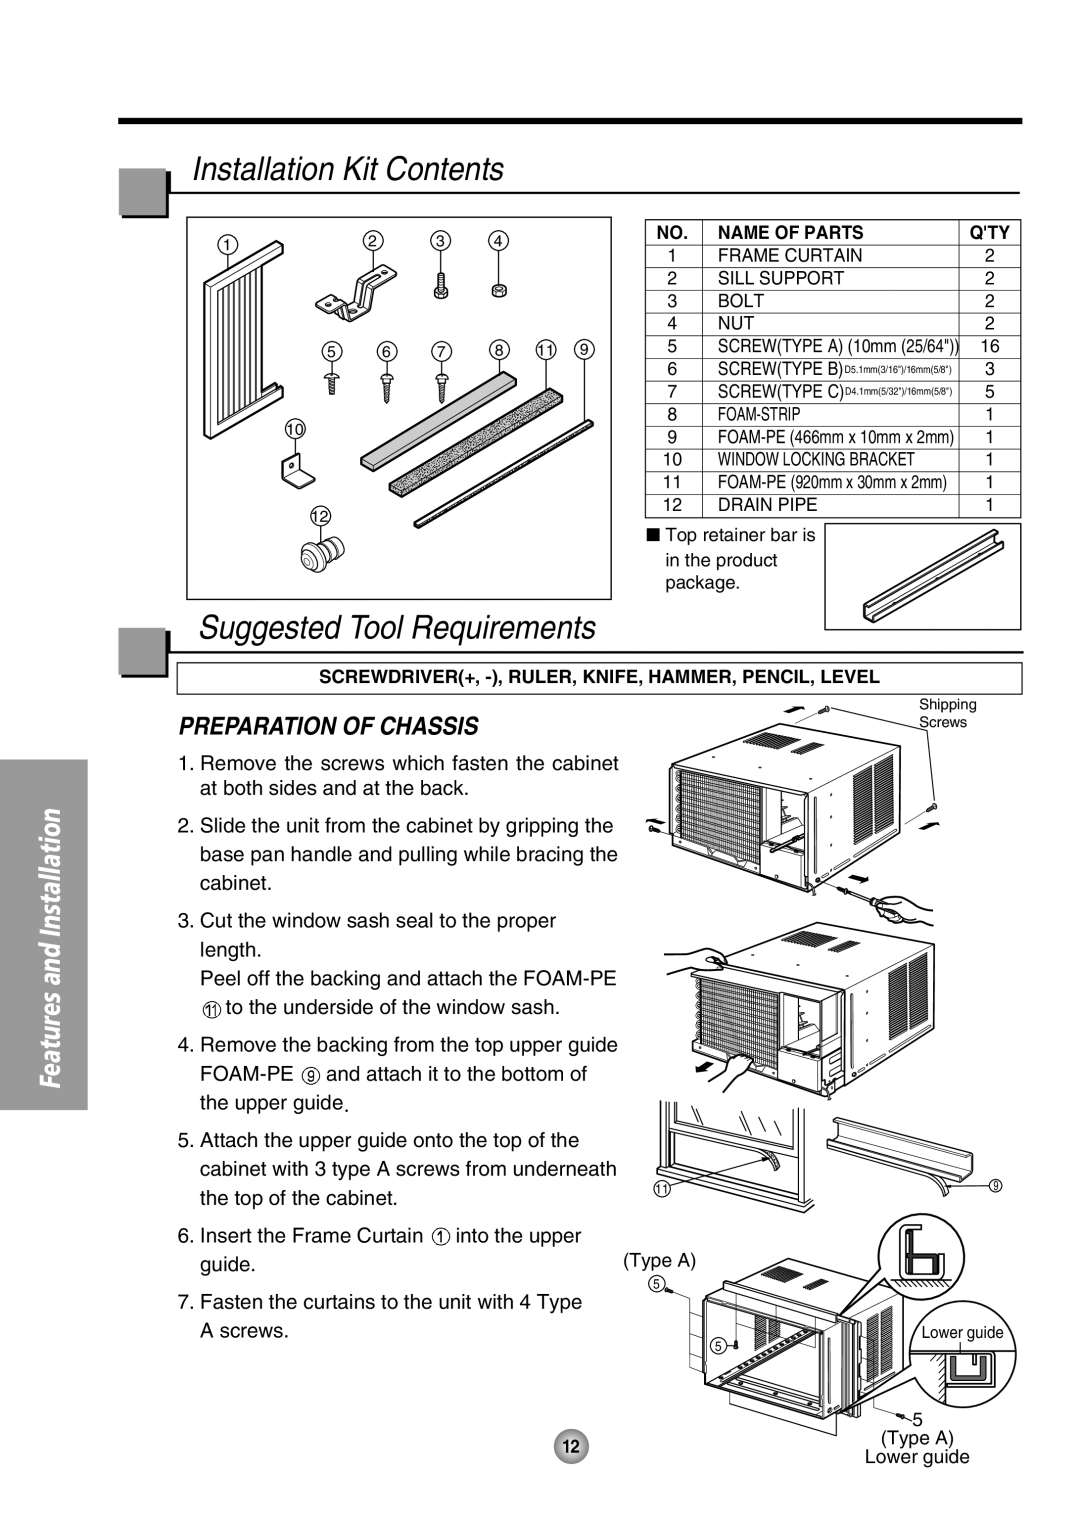 Panasonic CW-XC64HU manual Installation Kit Contents, Suggested Tool Requirements, Preparation Of Chassis 